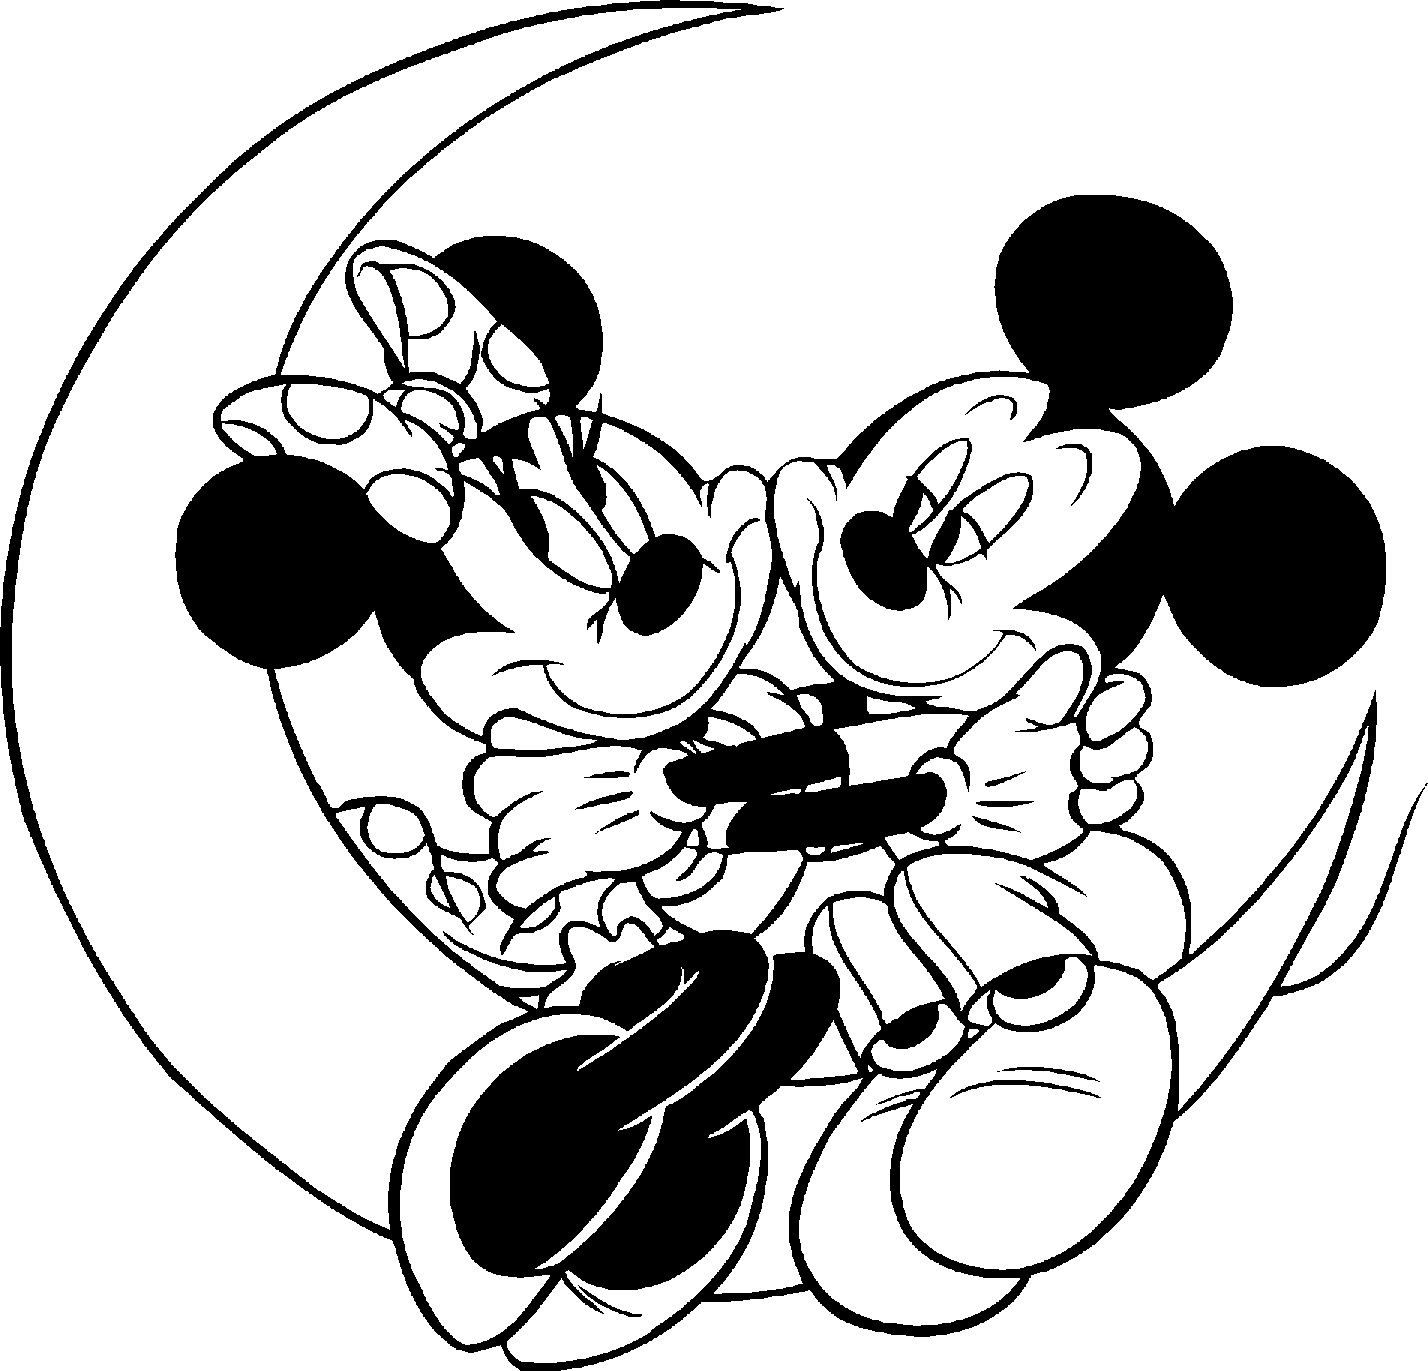 Free Mickey Mouse Coloring Pages at GetDrawings Free download